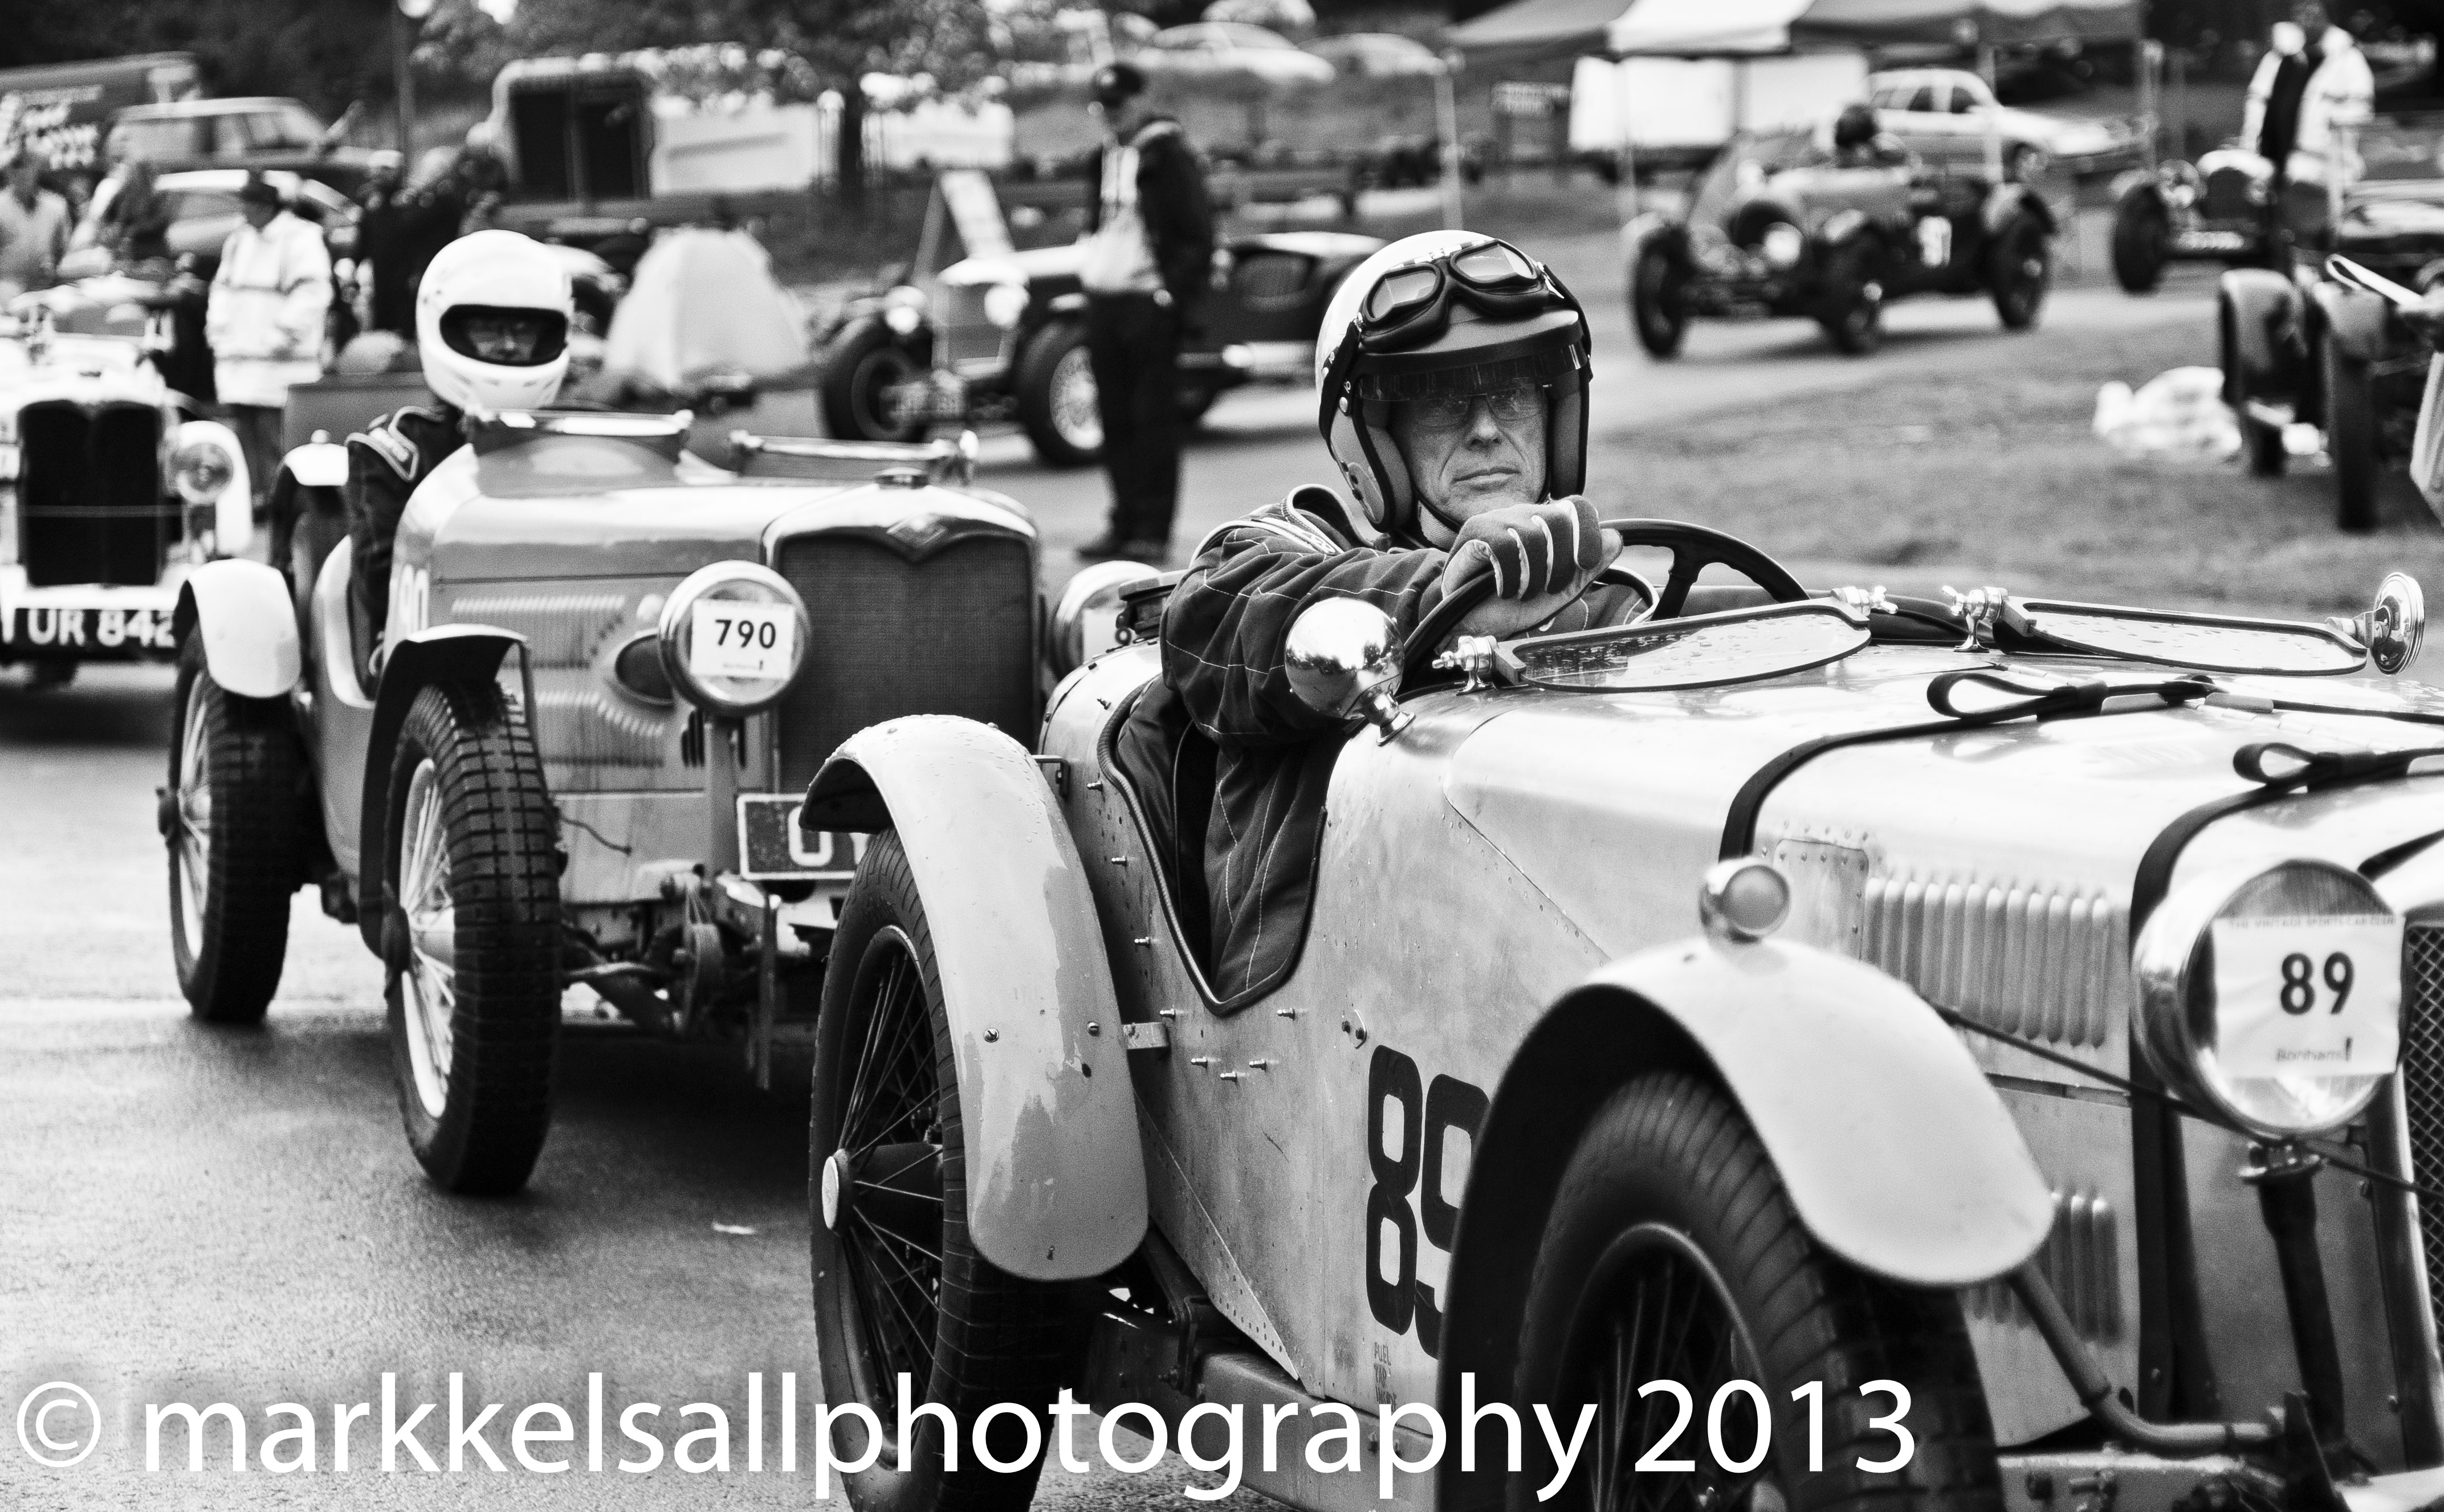 Have you entered for the VSCC Loton Park Hill Climb? cover